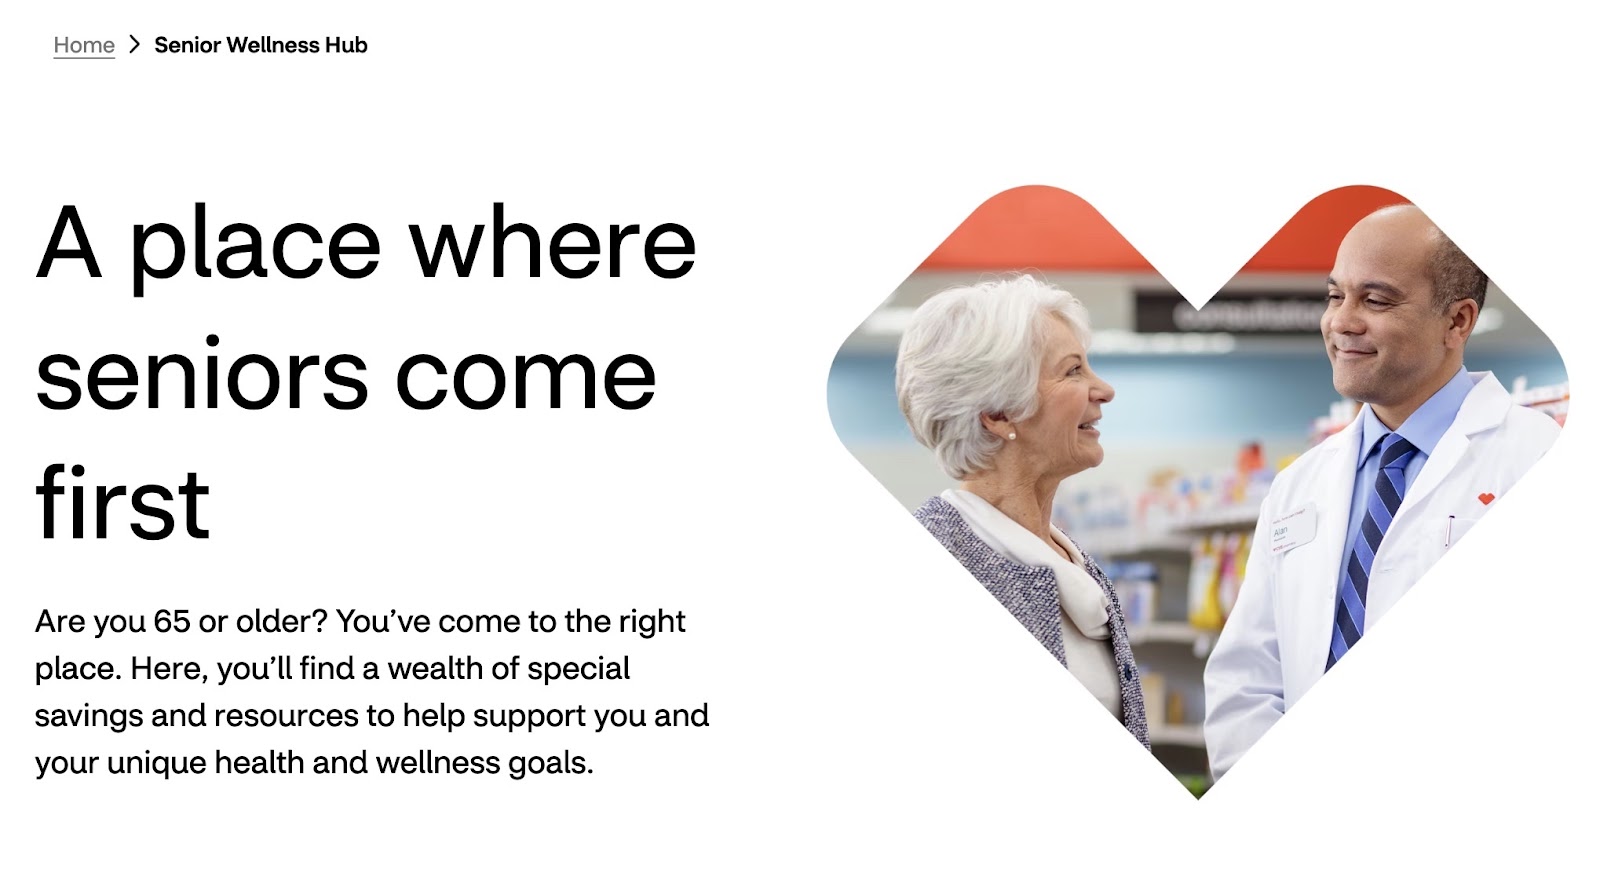 "A place where seniors come first" landing page on CVS's website